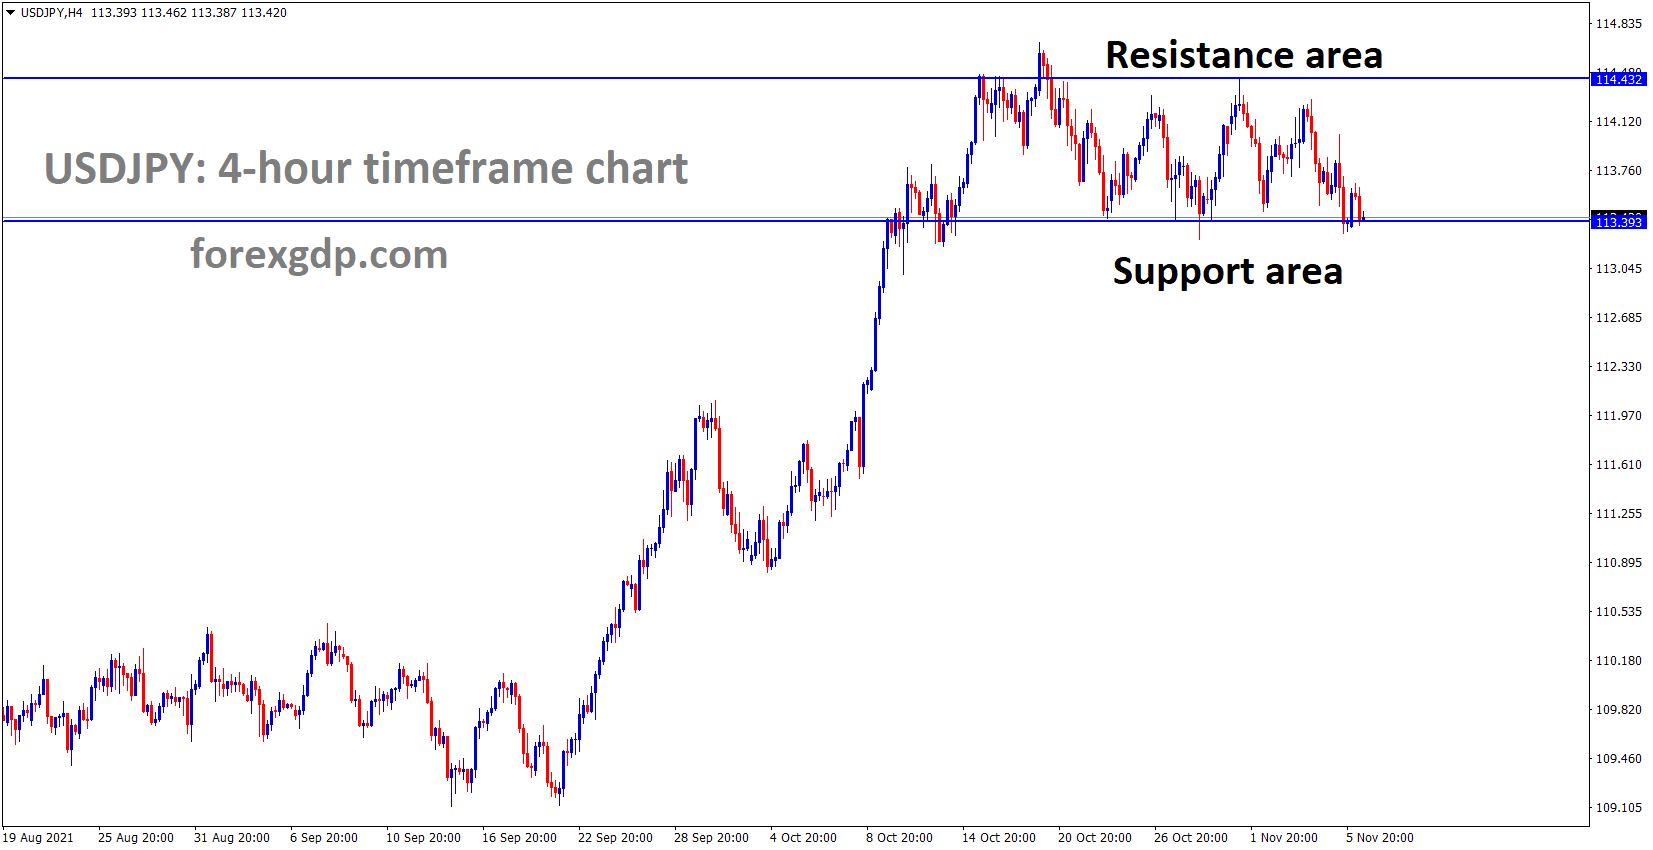 USDJPY has reached the support area of the Box pattern